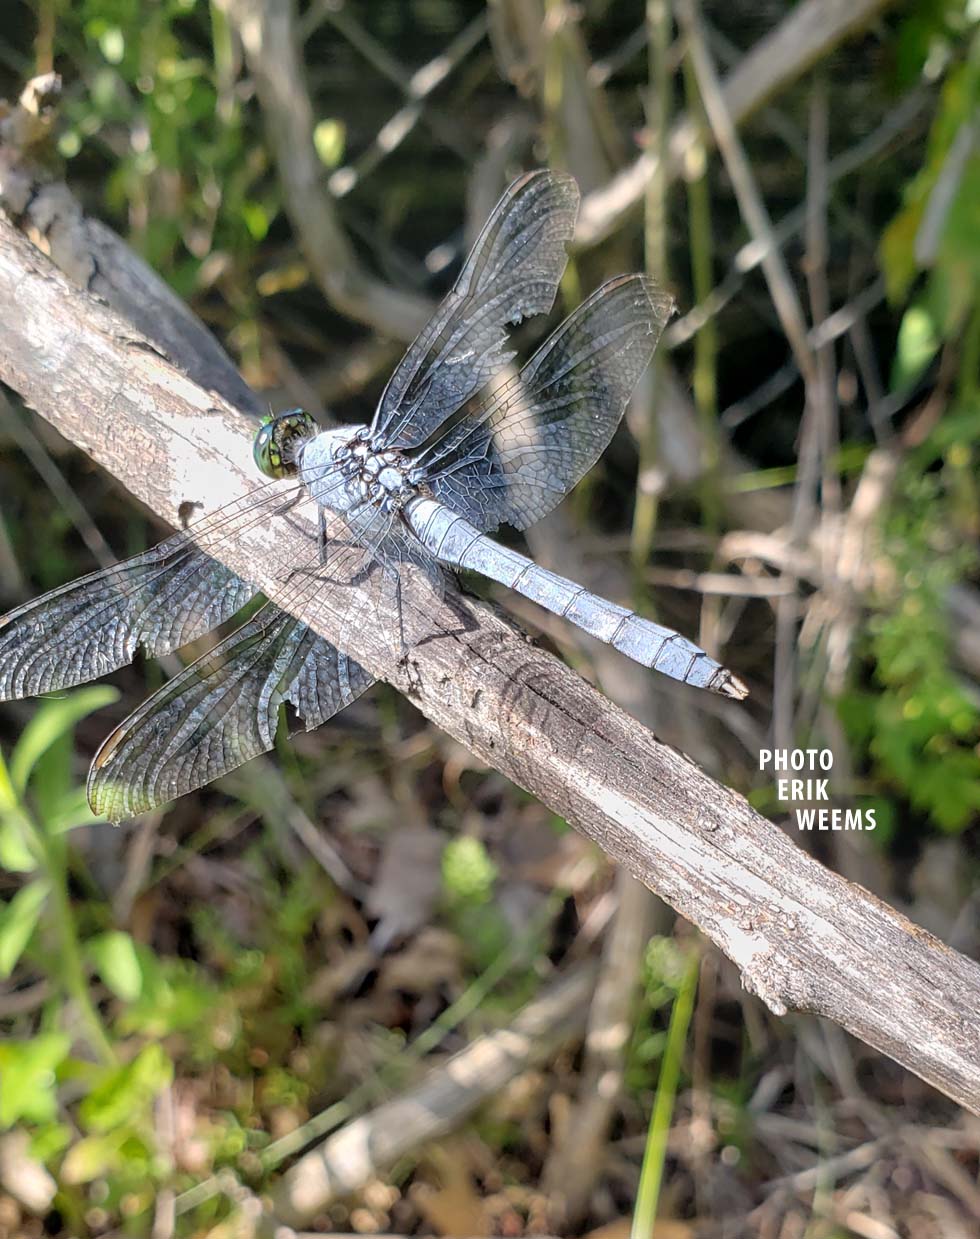 Blue Dragonfly Chesterfield Virginia Photo by Erik Weems